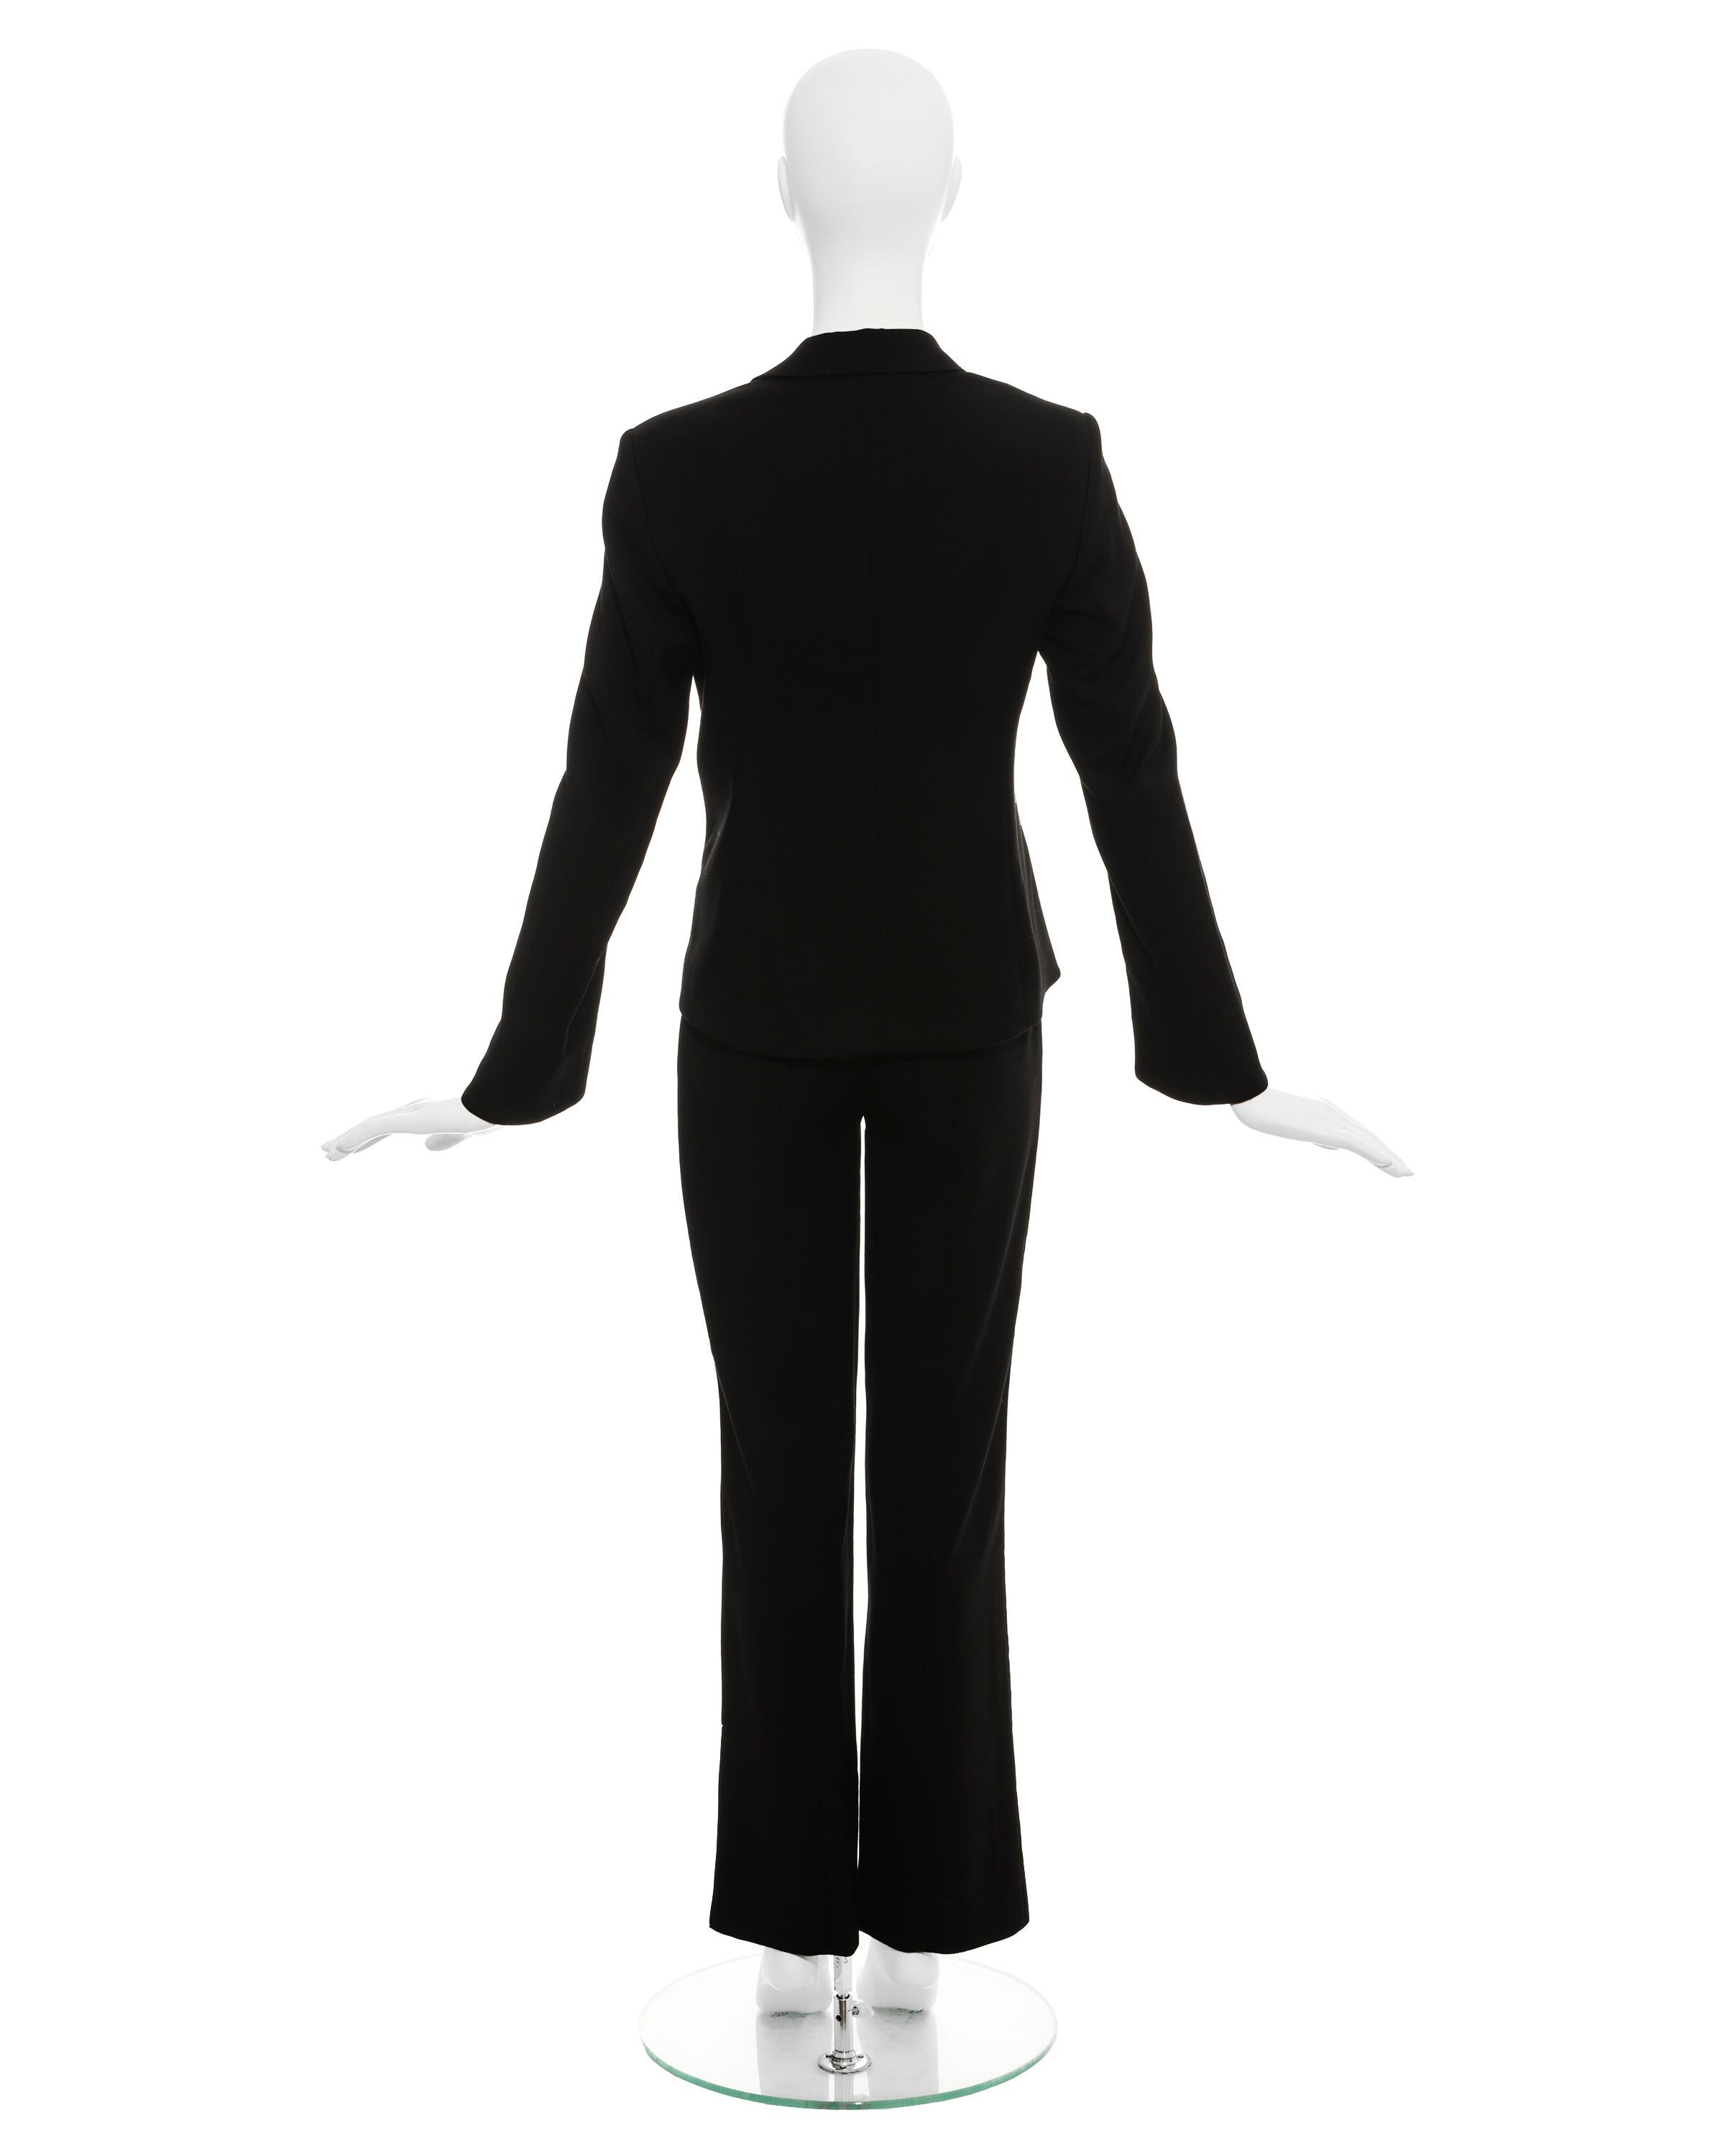 Black Gianni Versace black wool pant suit with mesh inserts, ss 1998